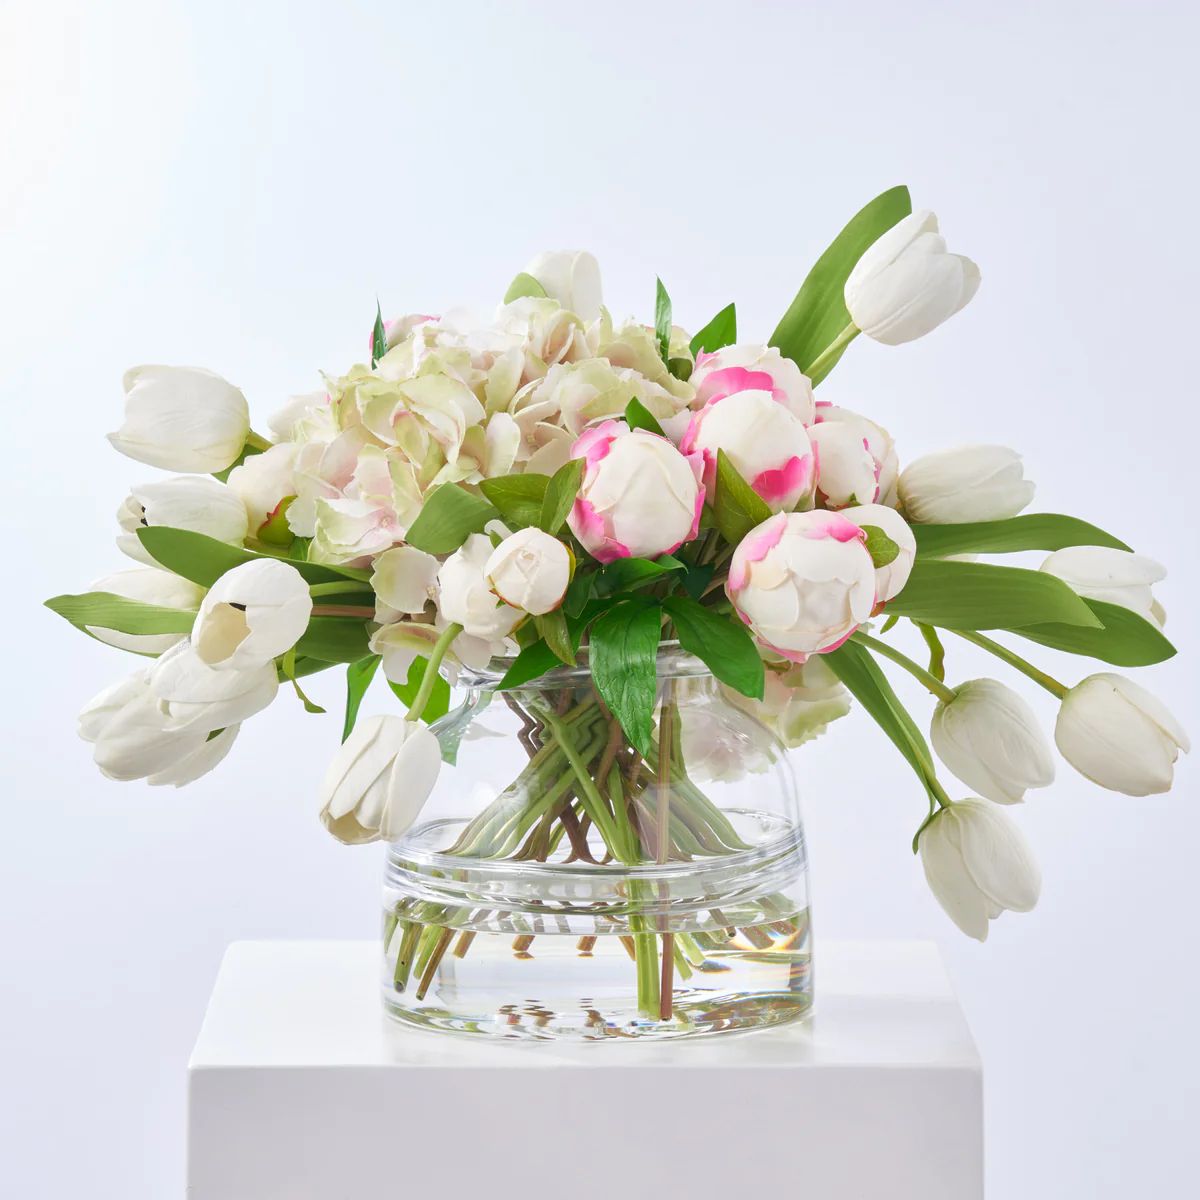 Heavenly Garden - Pink Green Hydrangea, Real Touch Peony Buds & White Tulips in Jug Style Vase Sp... | Darby Creek Trading